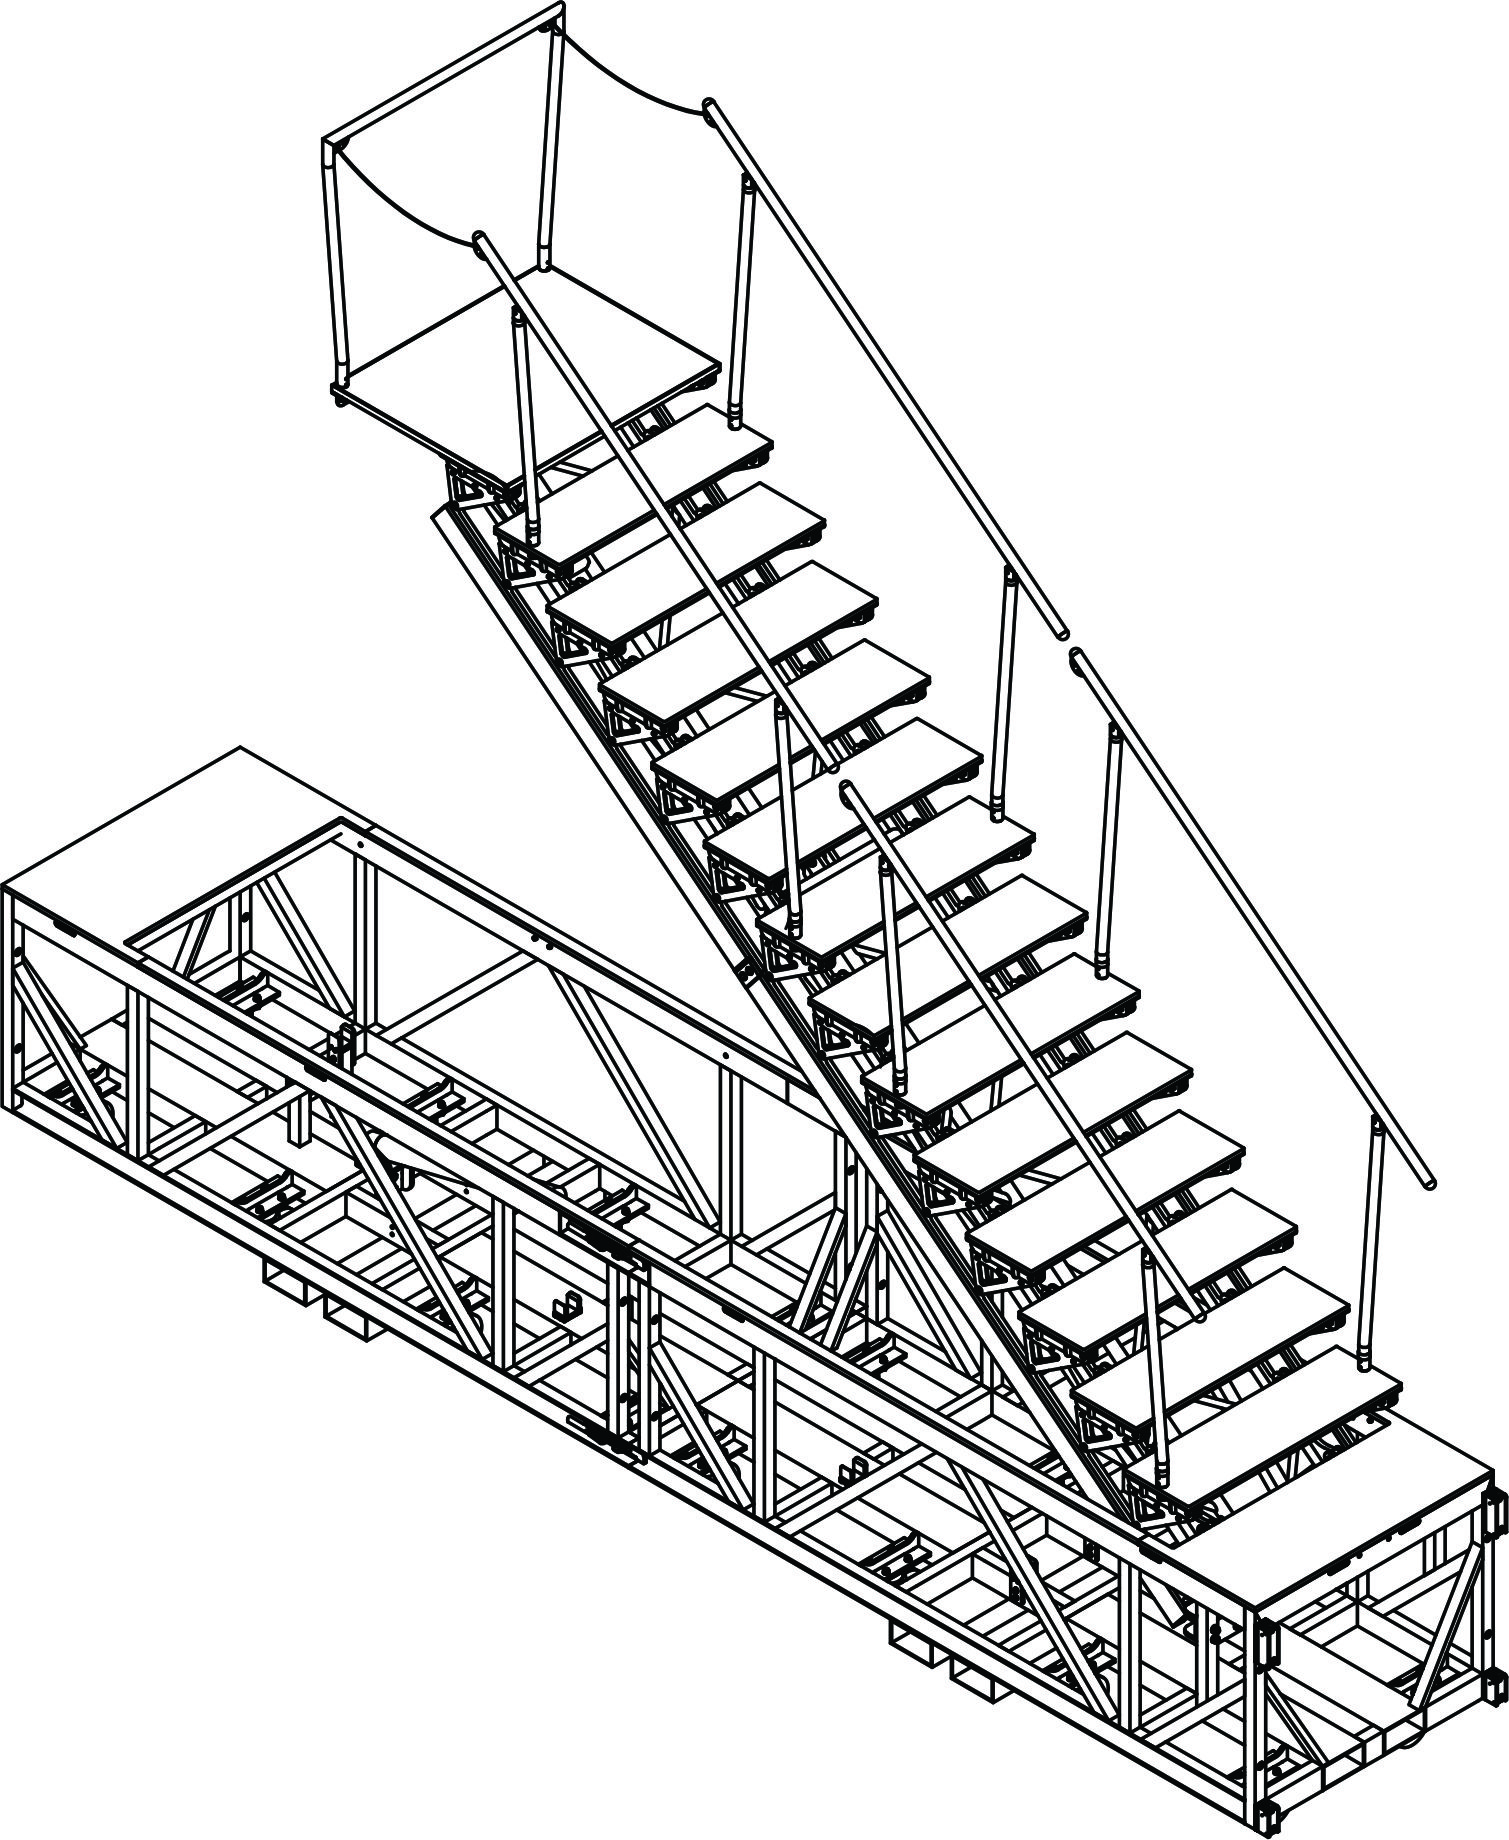 Pantograph_Stairs_UP_ISO.jpg